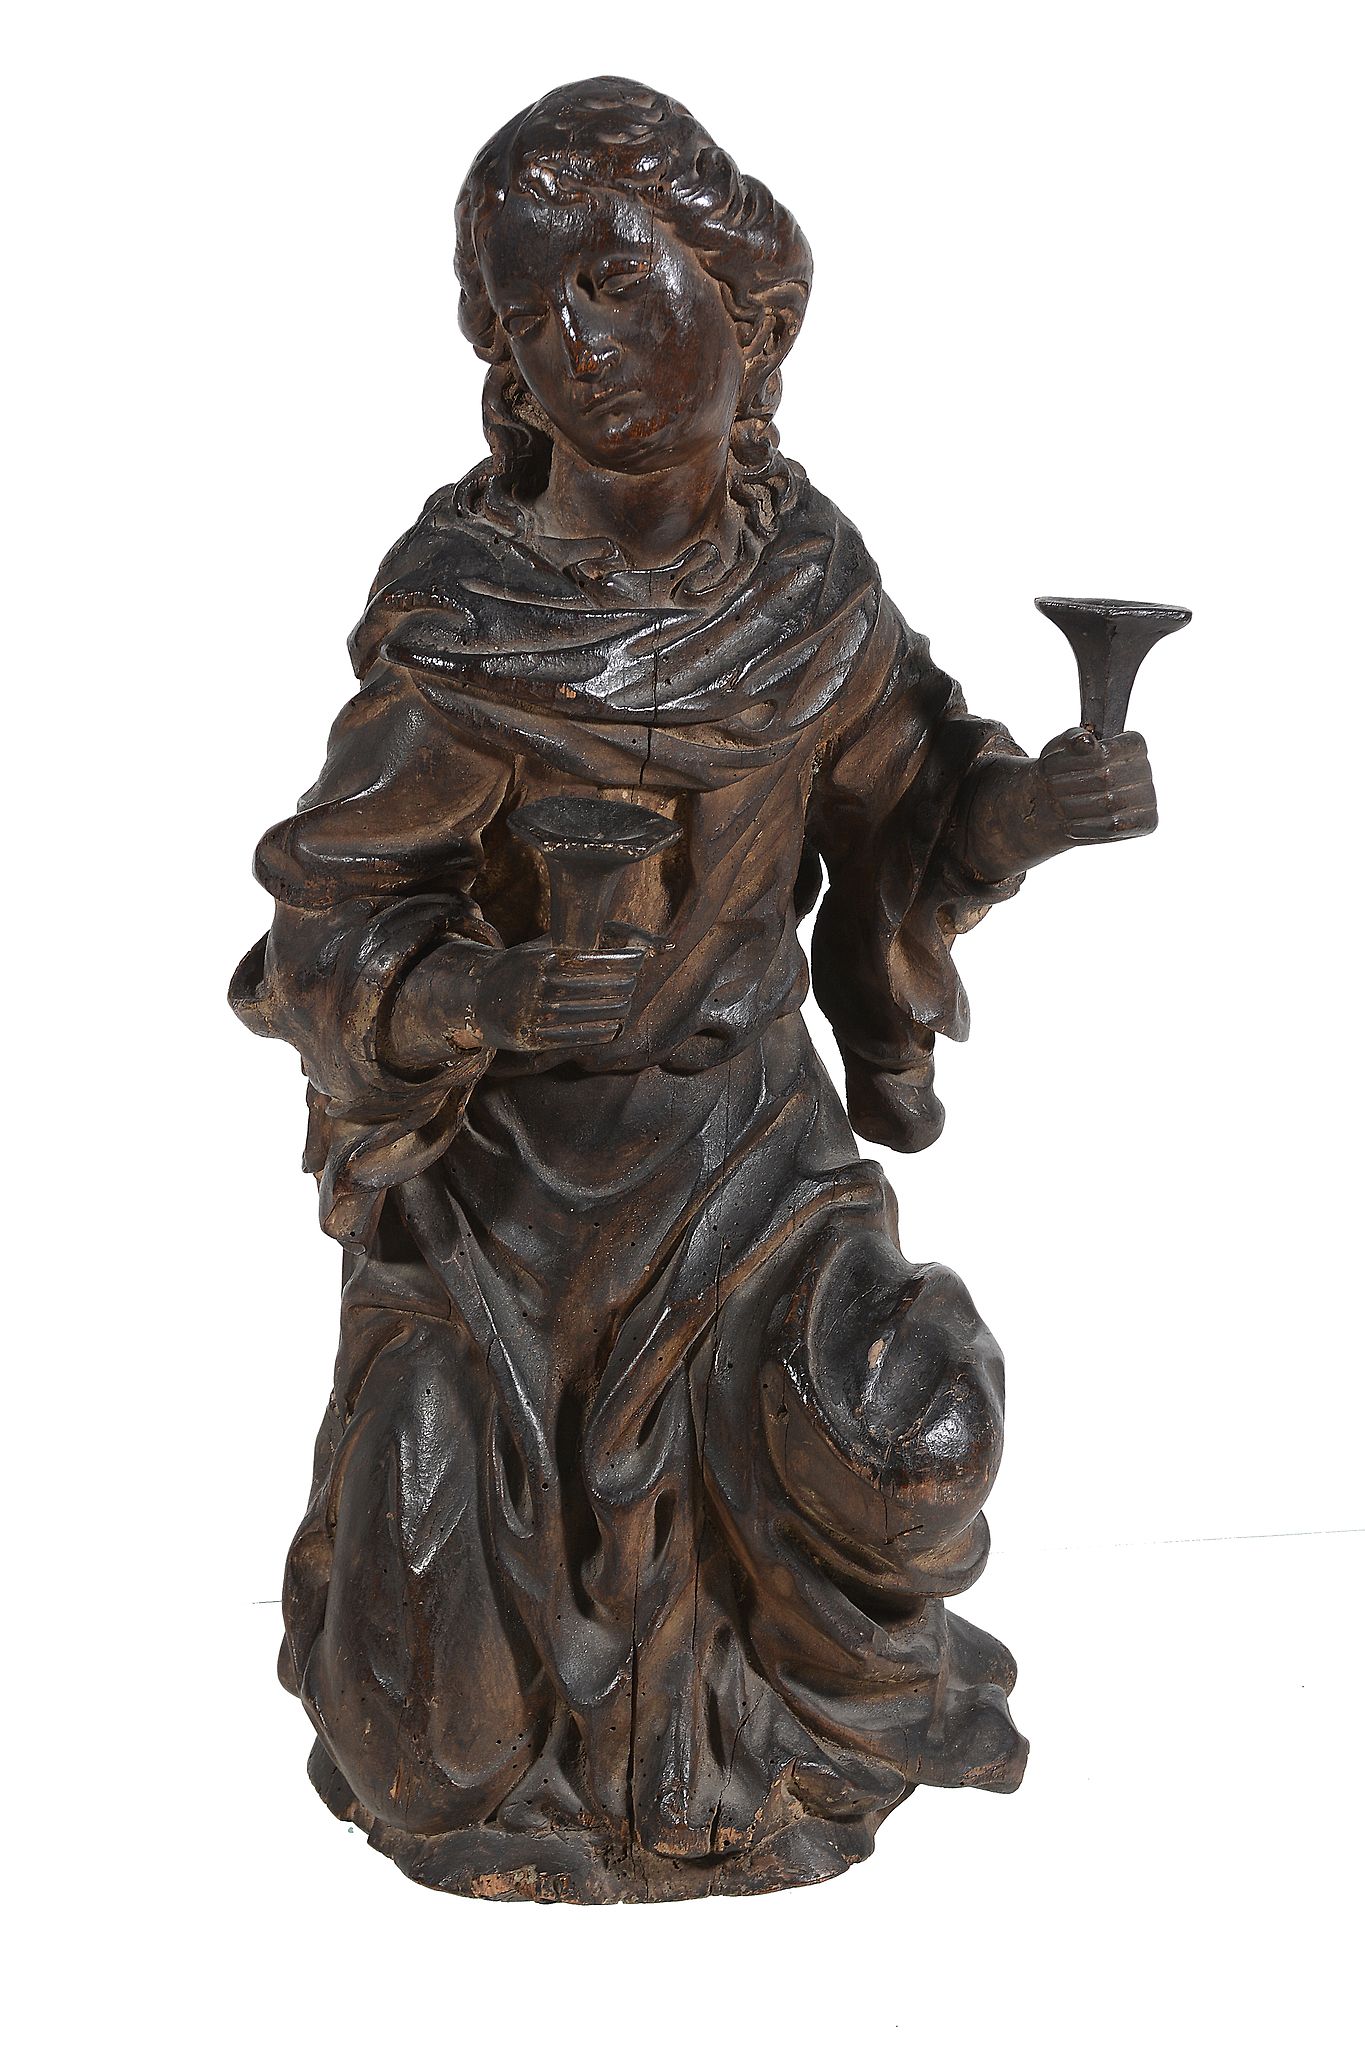 A central European sculpted and stained wood model of a female saint   A central European sculpted